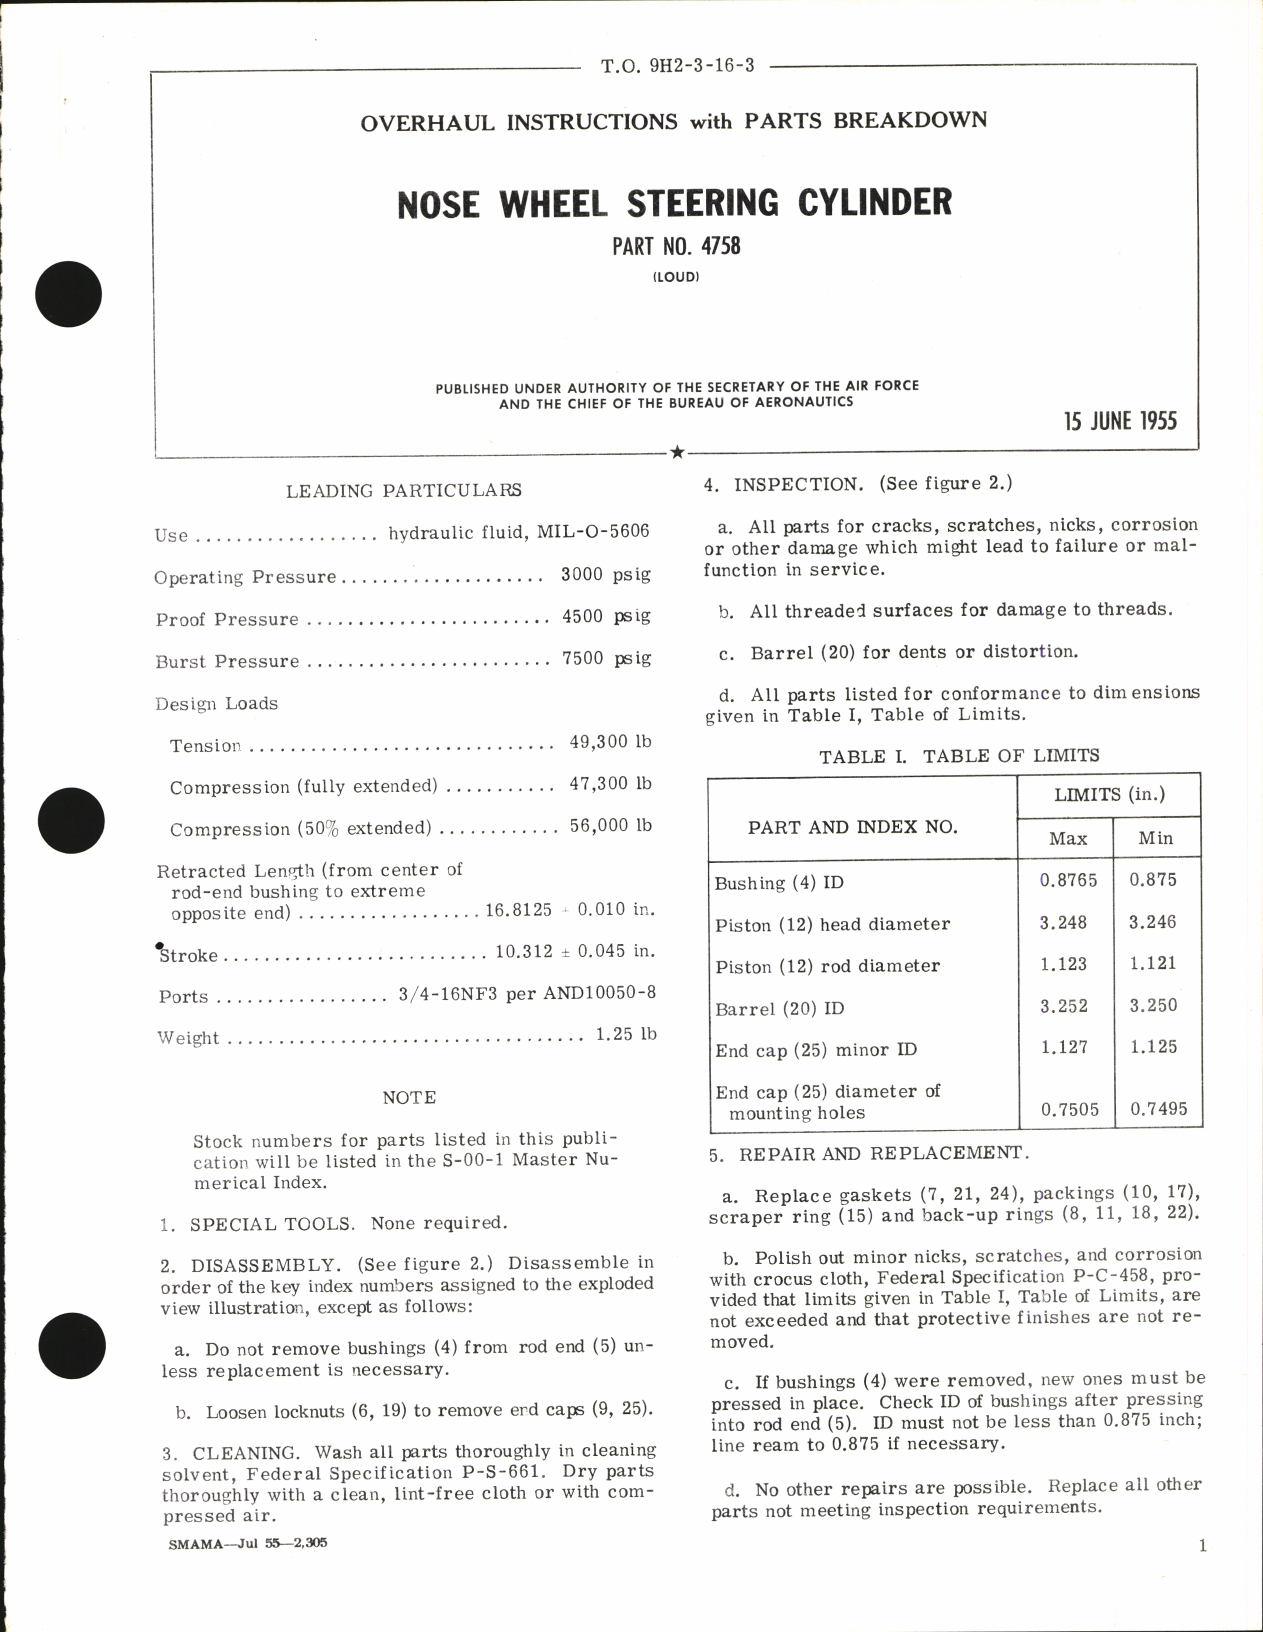 Sample page 1 from AirCorps Library document: Overhaul Instructions with Parts Breakdown for Nose Wheel Steering Cylinder Part No. 4758